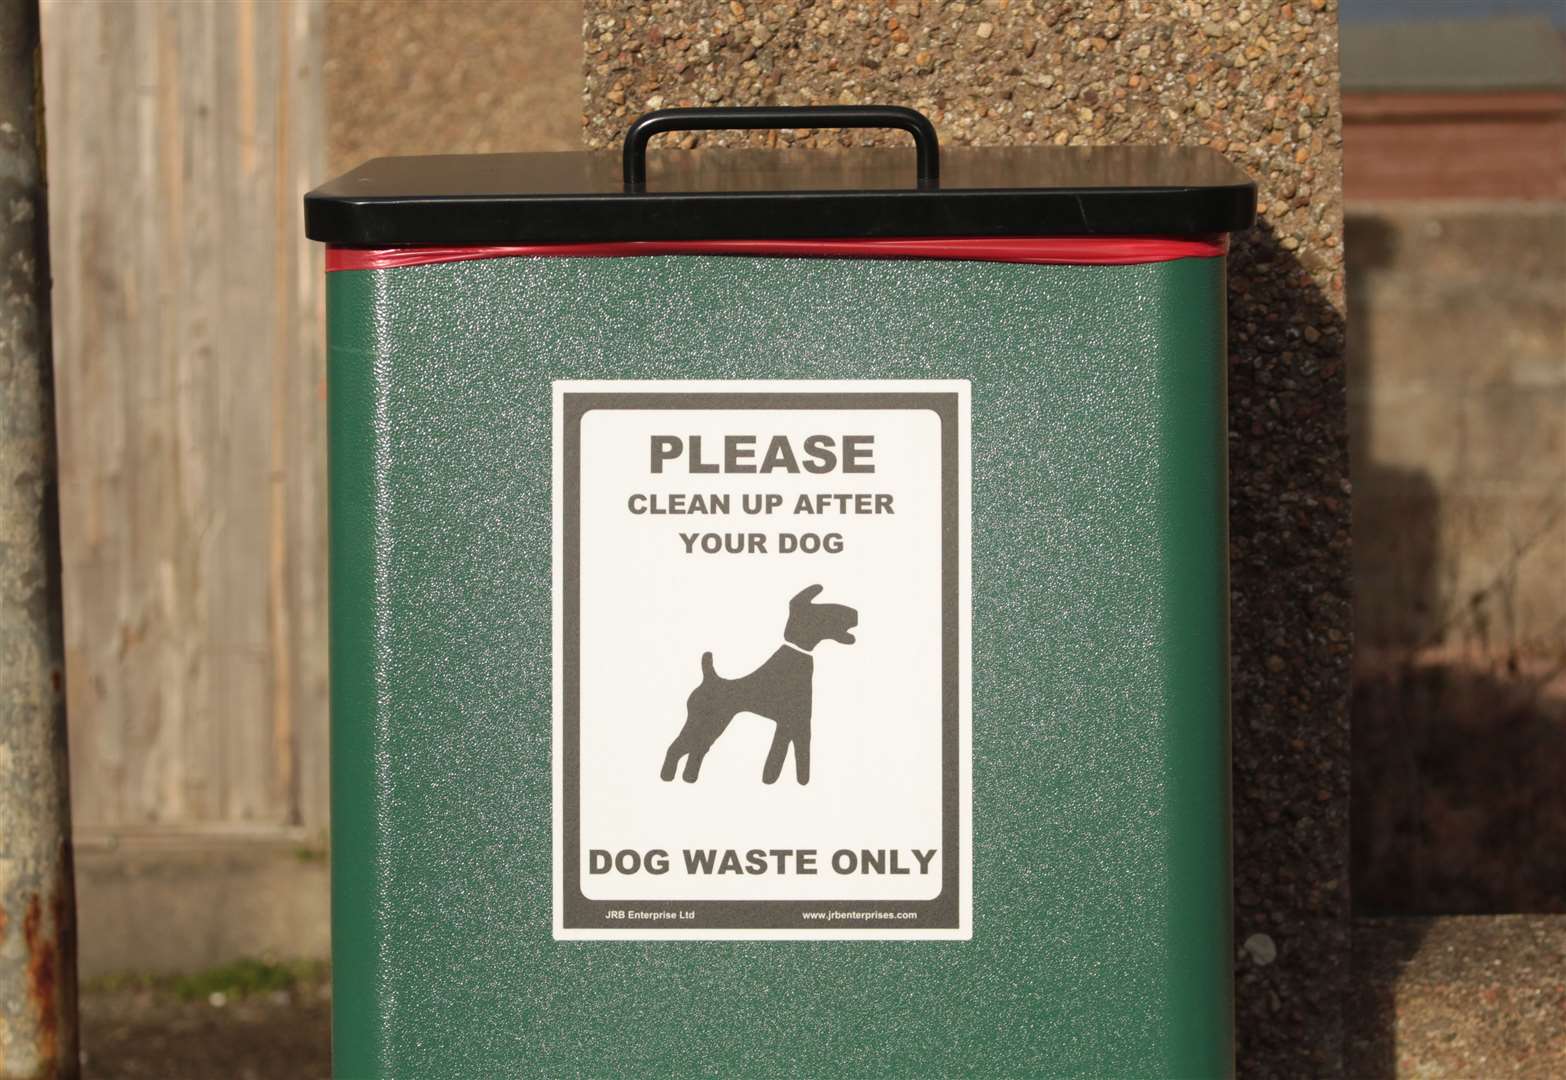 There was a suggestion that a map could be produced highlighting where Wick's dog waste bins are located.